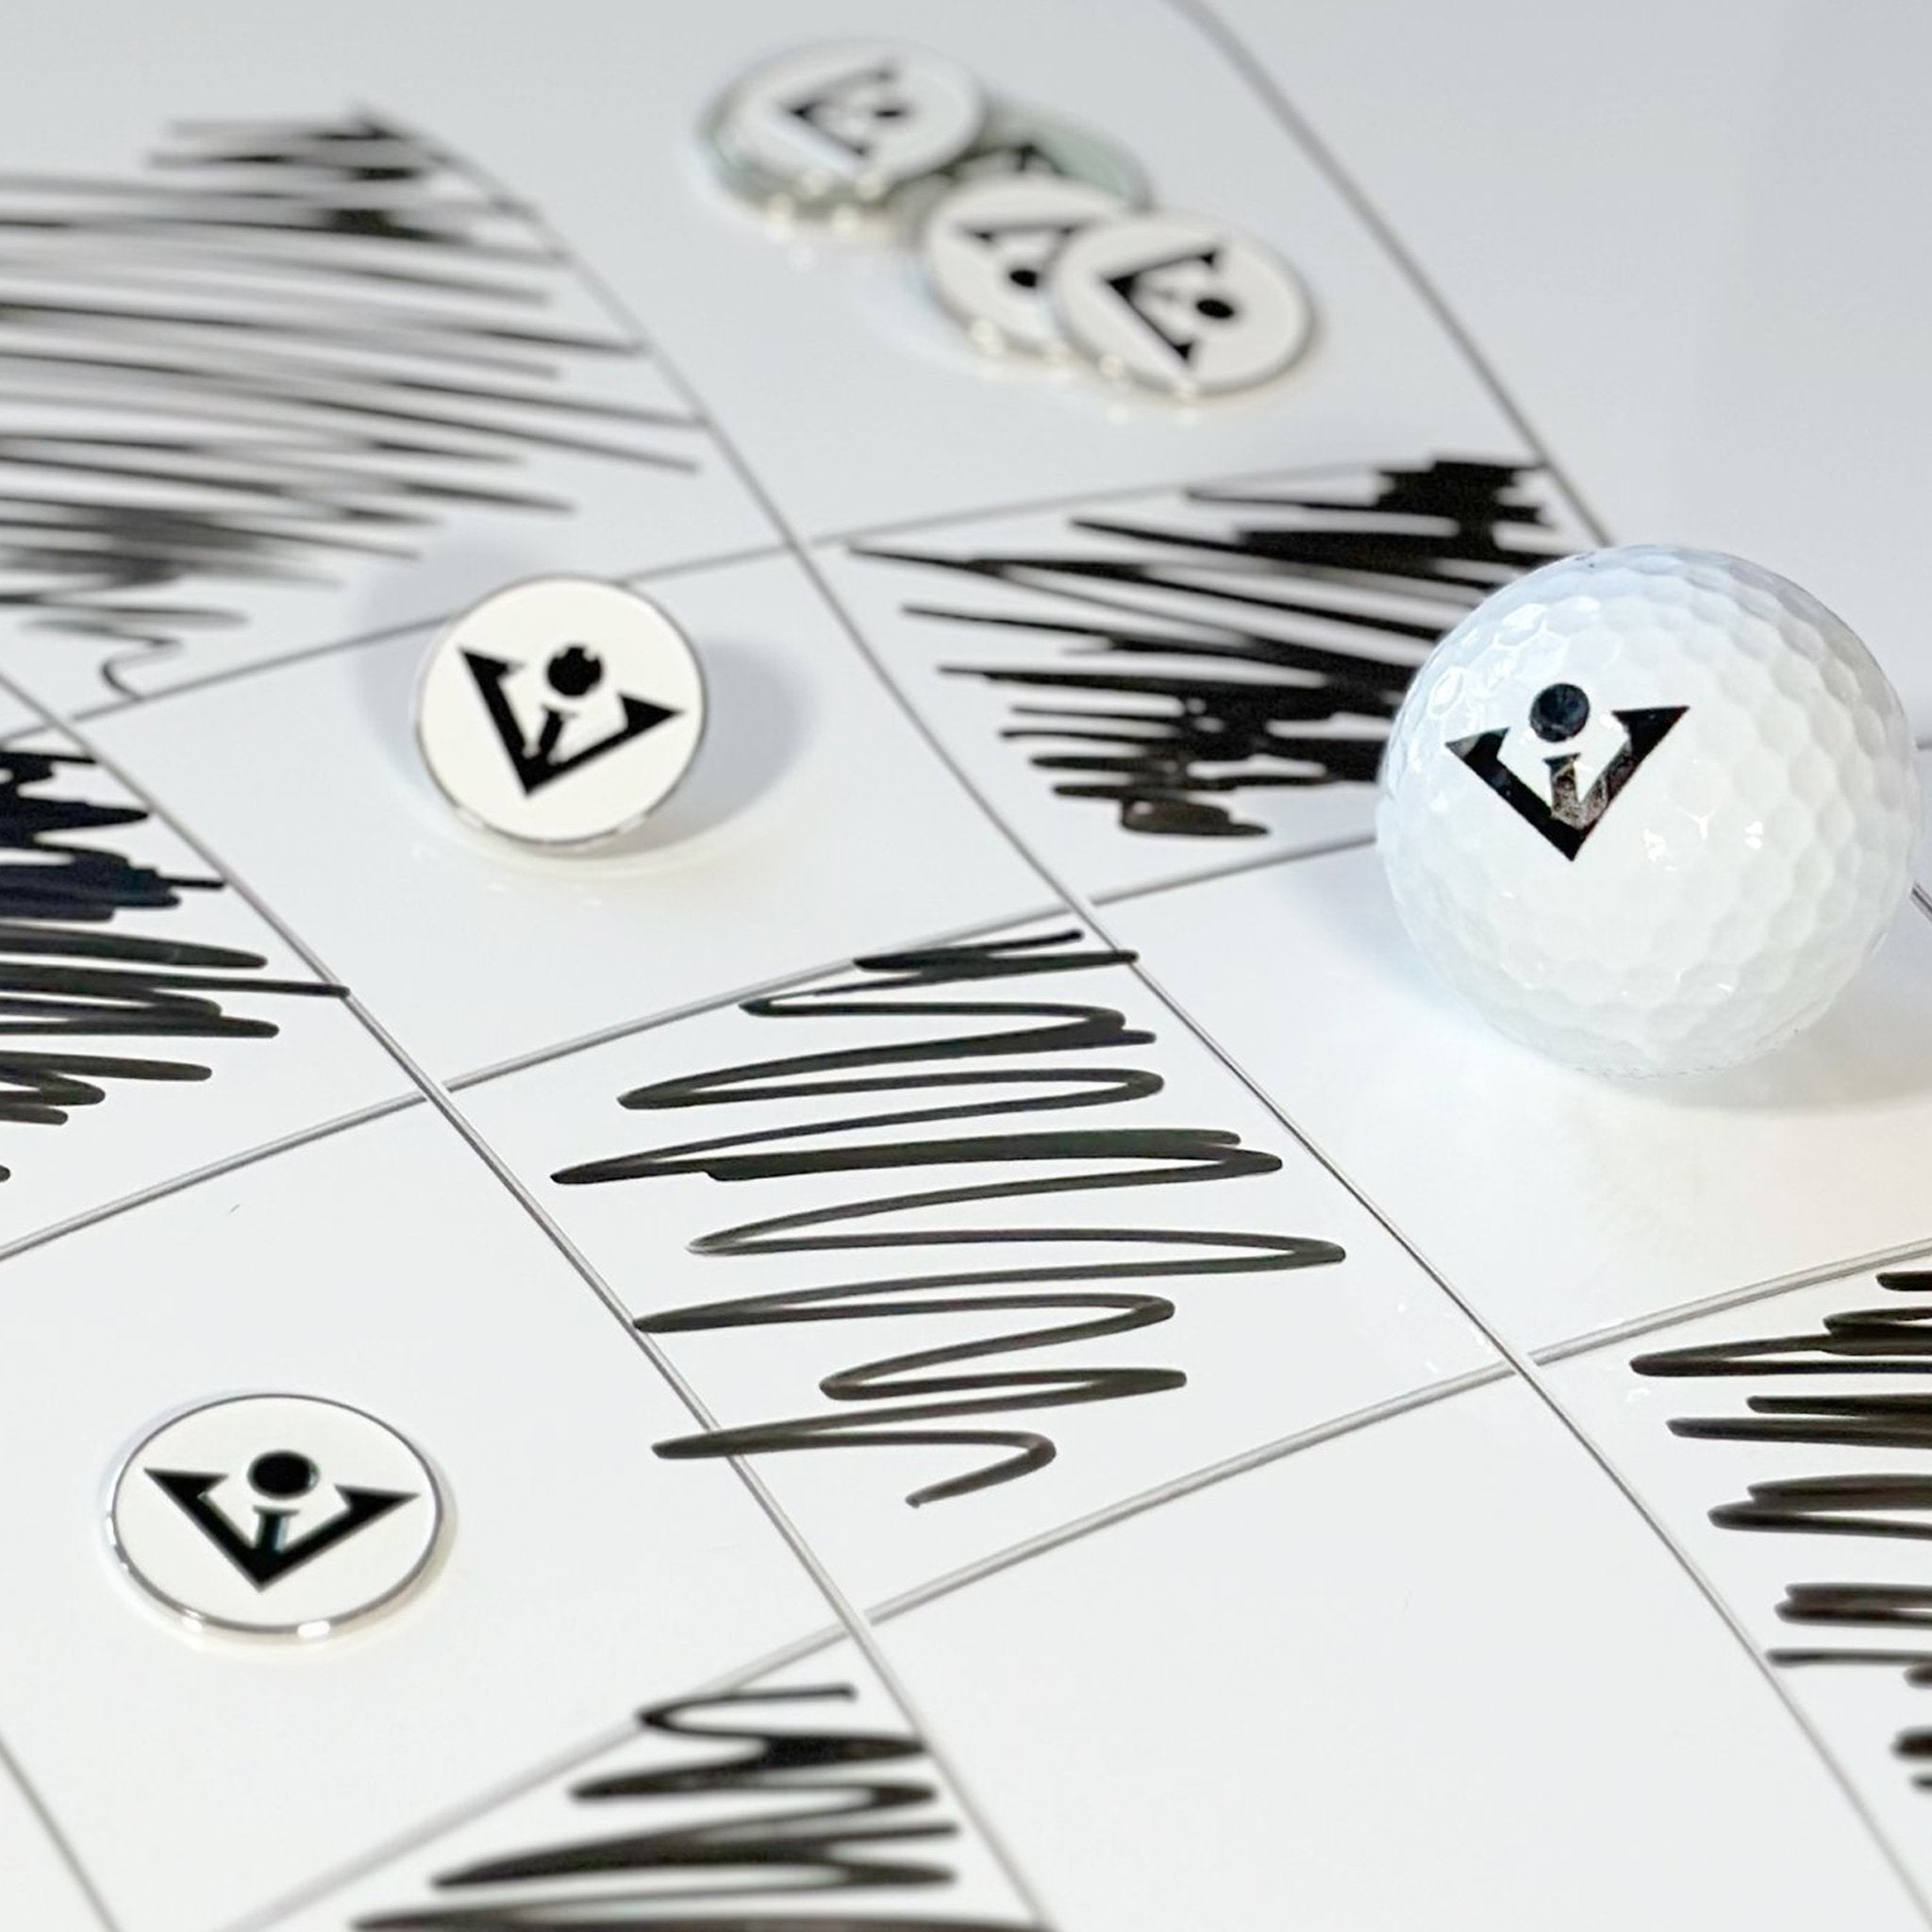 Black and white magnetic golf ball marker for our golf gloves with ball markers with a black and white checkered backdrop.